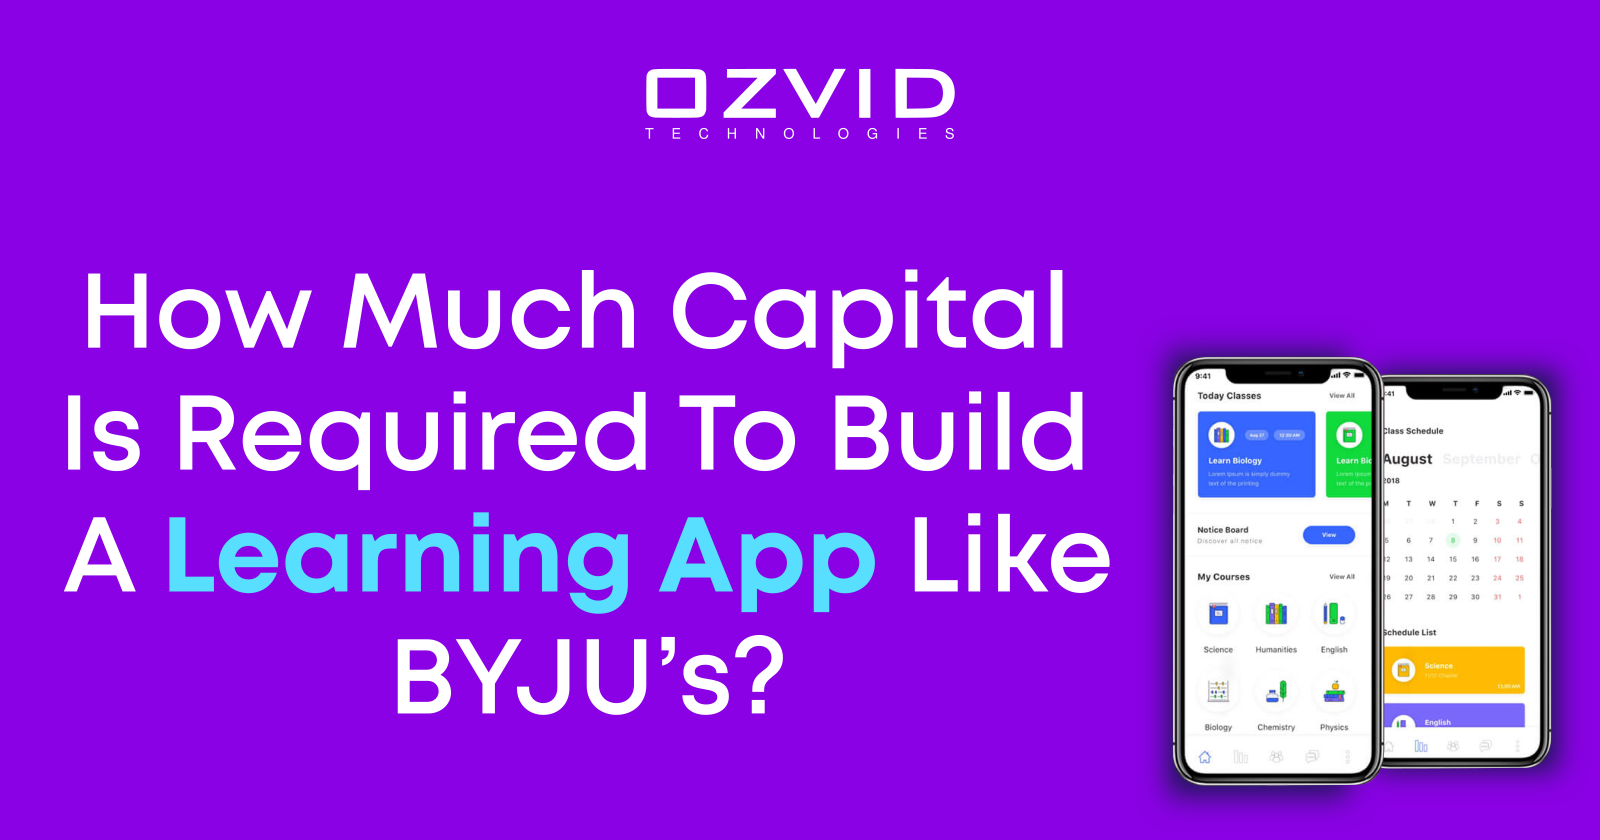 How Much Capital Is Required To Build A Learning App Like BYJU’s?